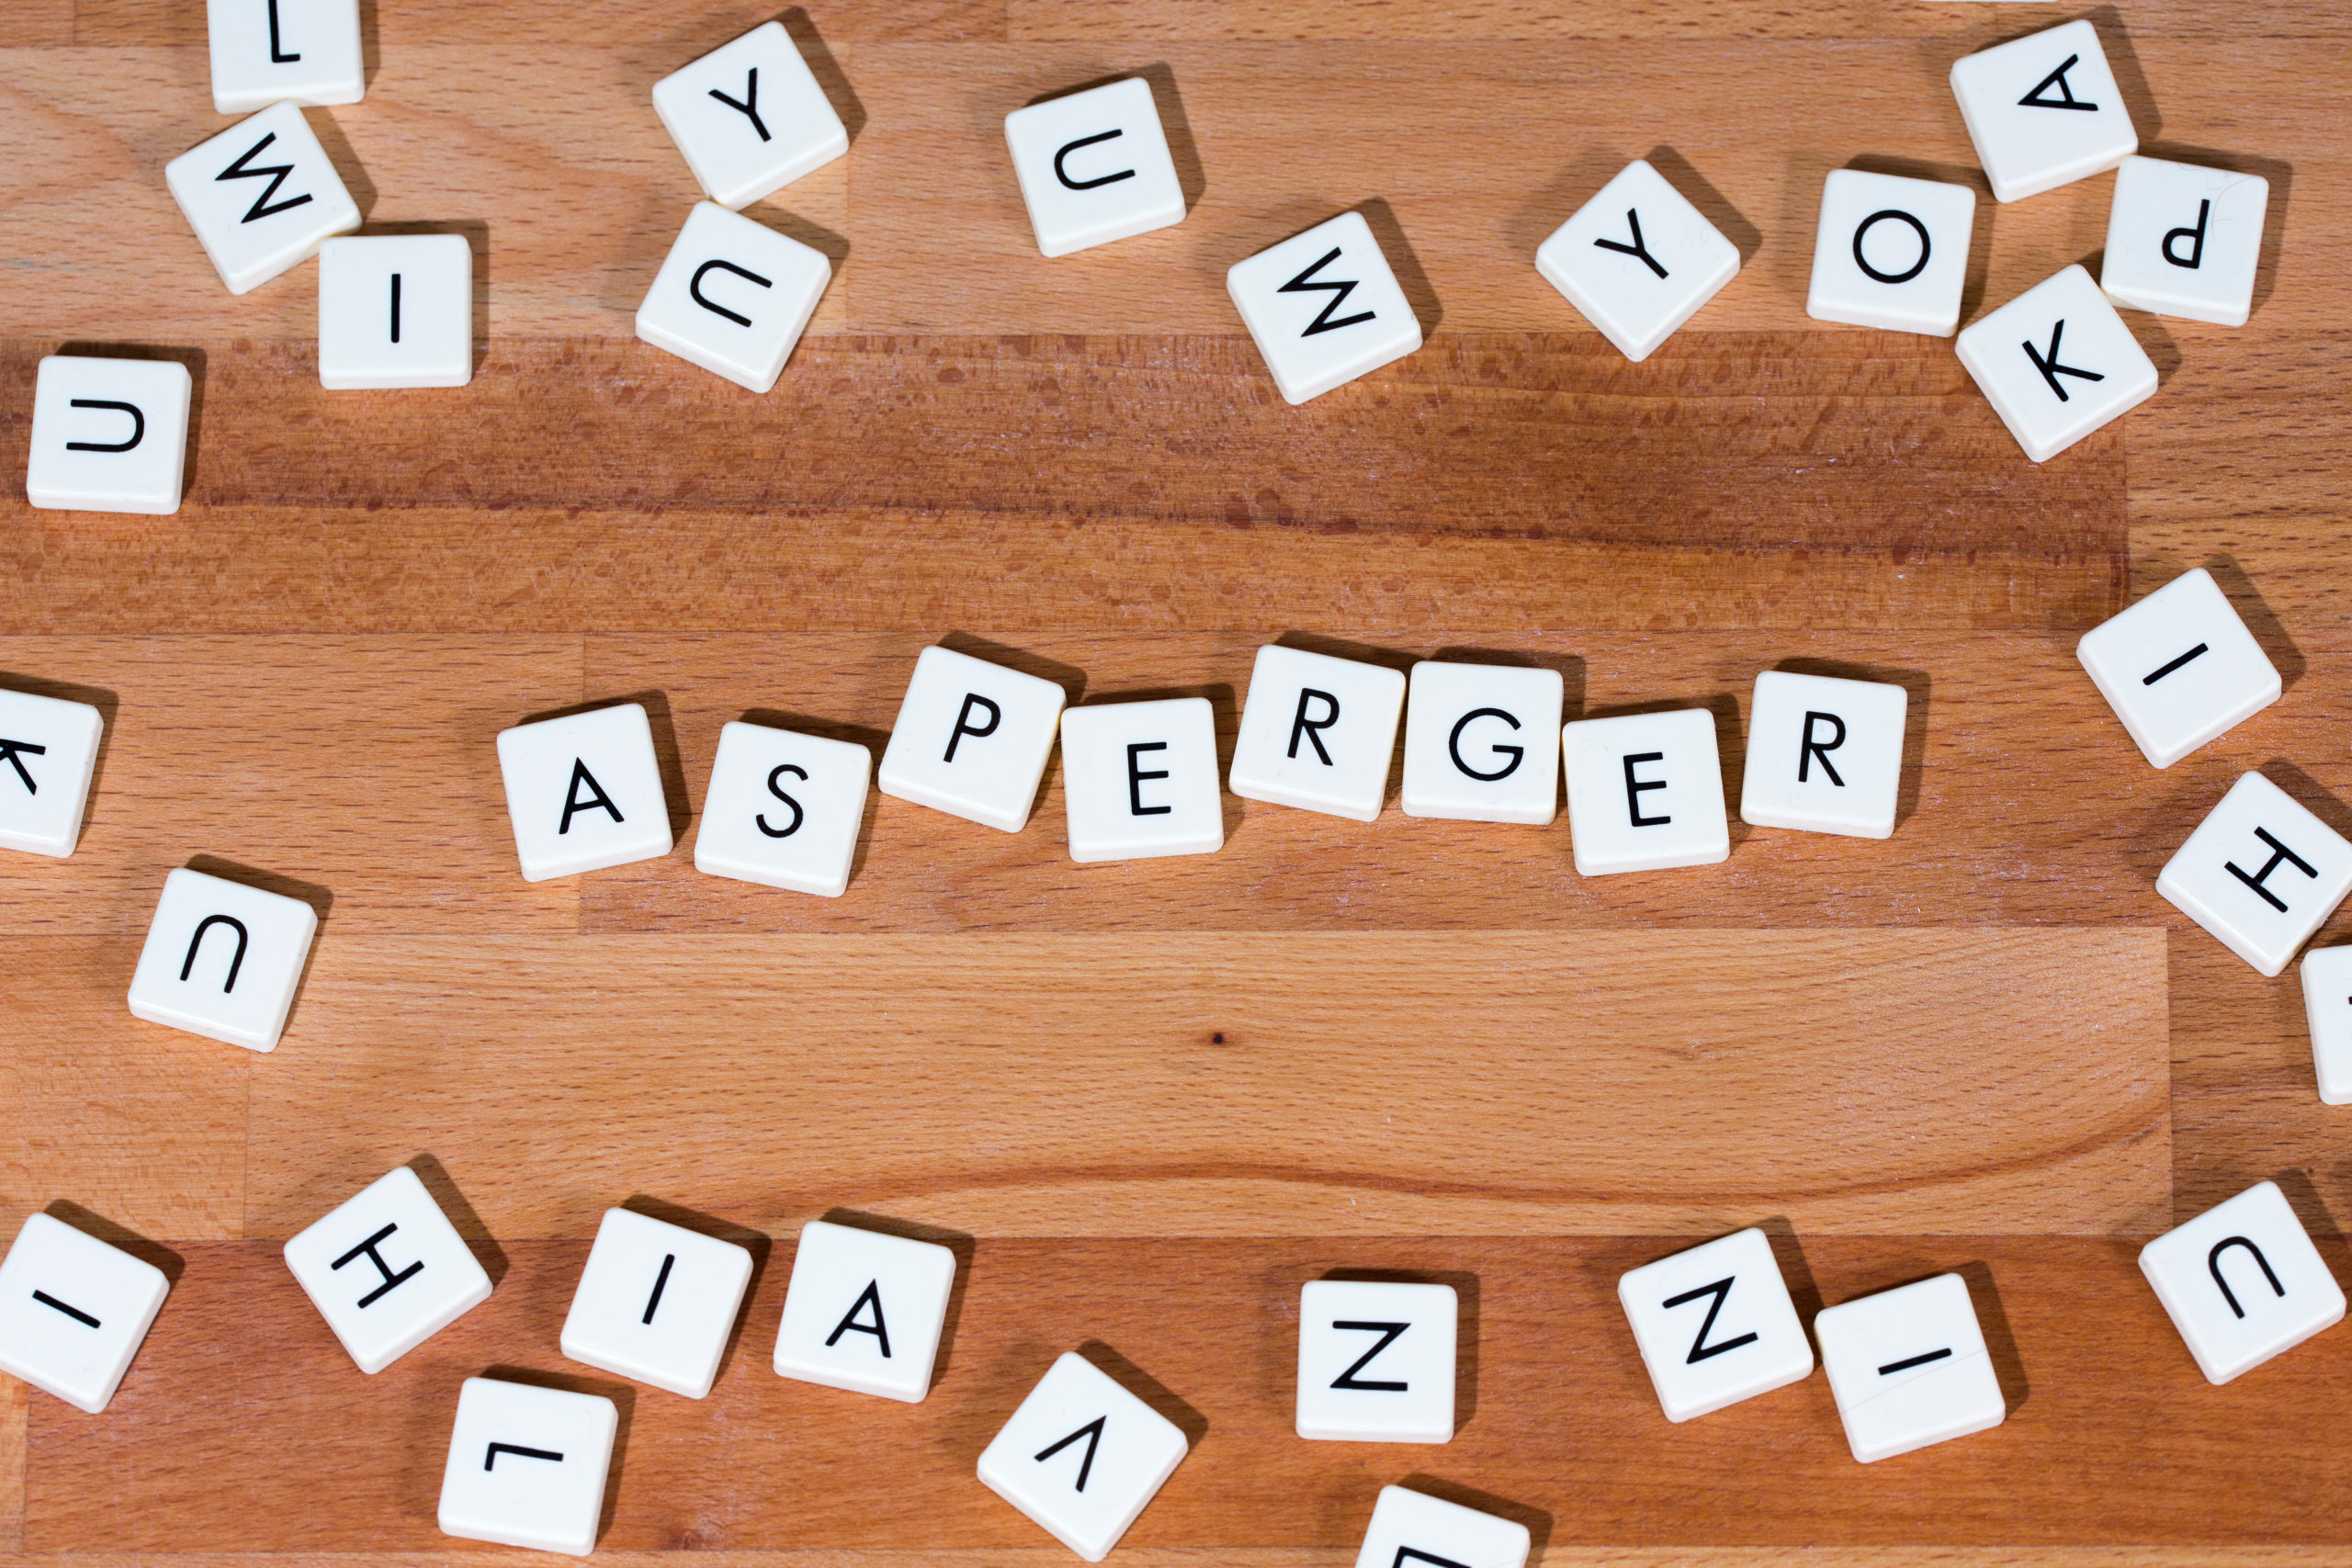 Asperger text on a wooden surface surrounded by letters. Asperge